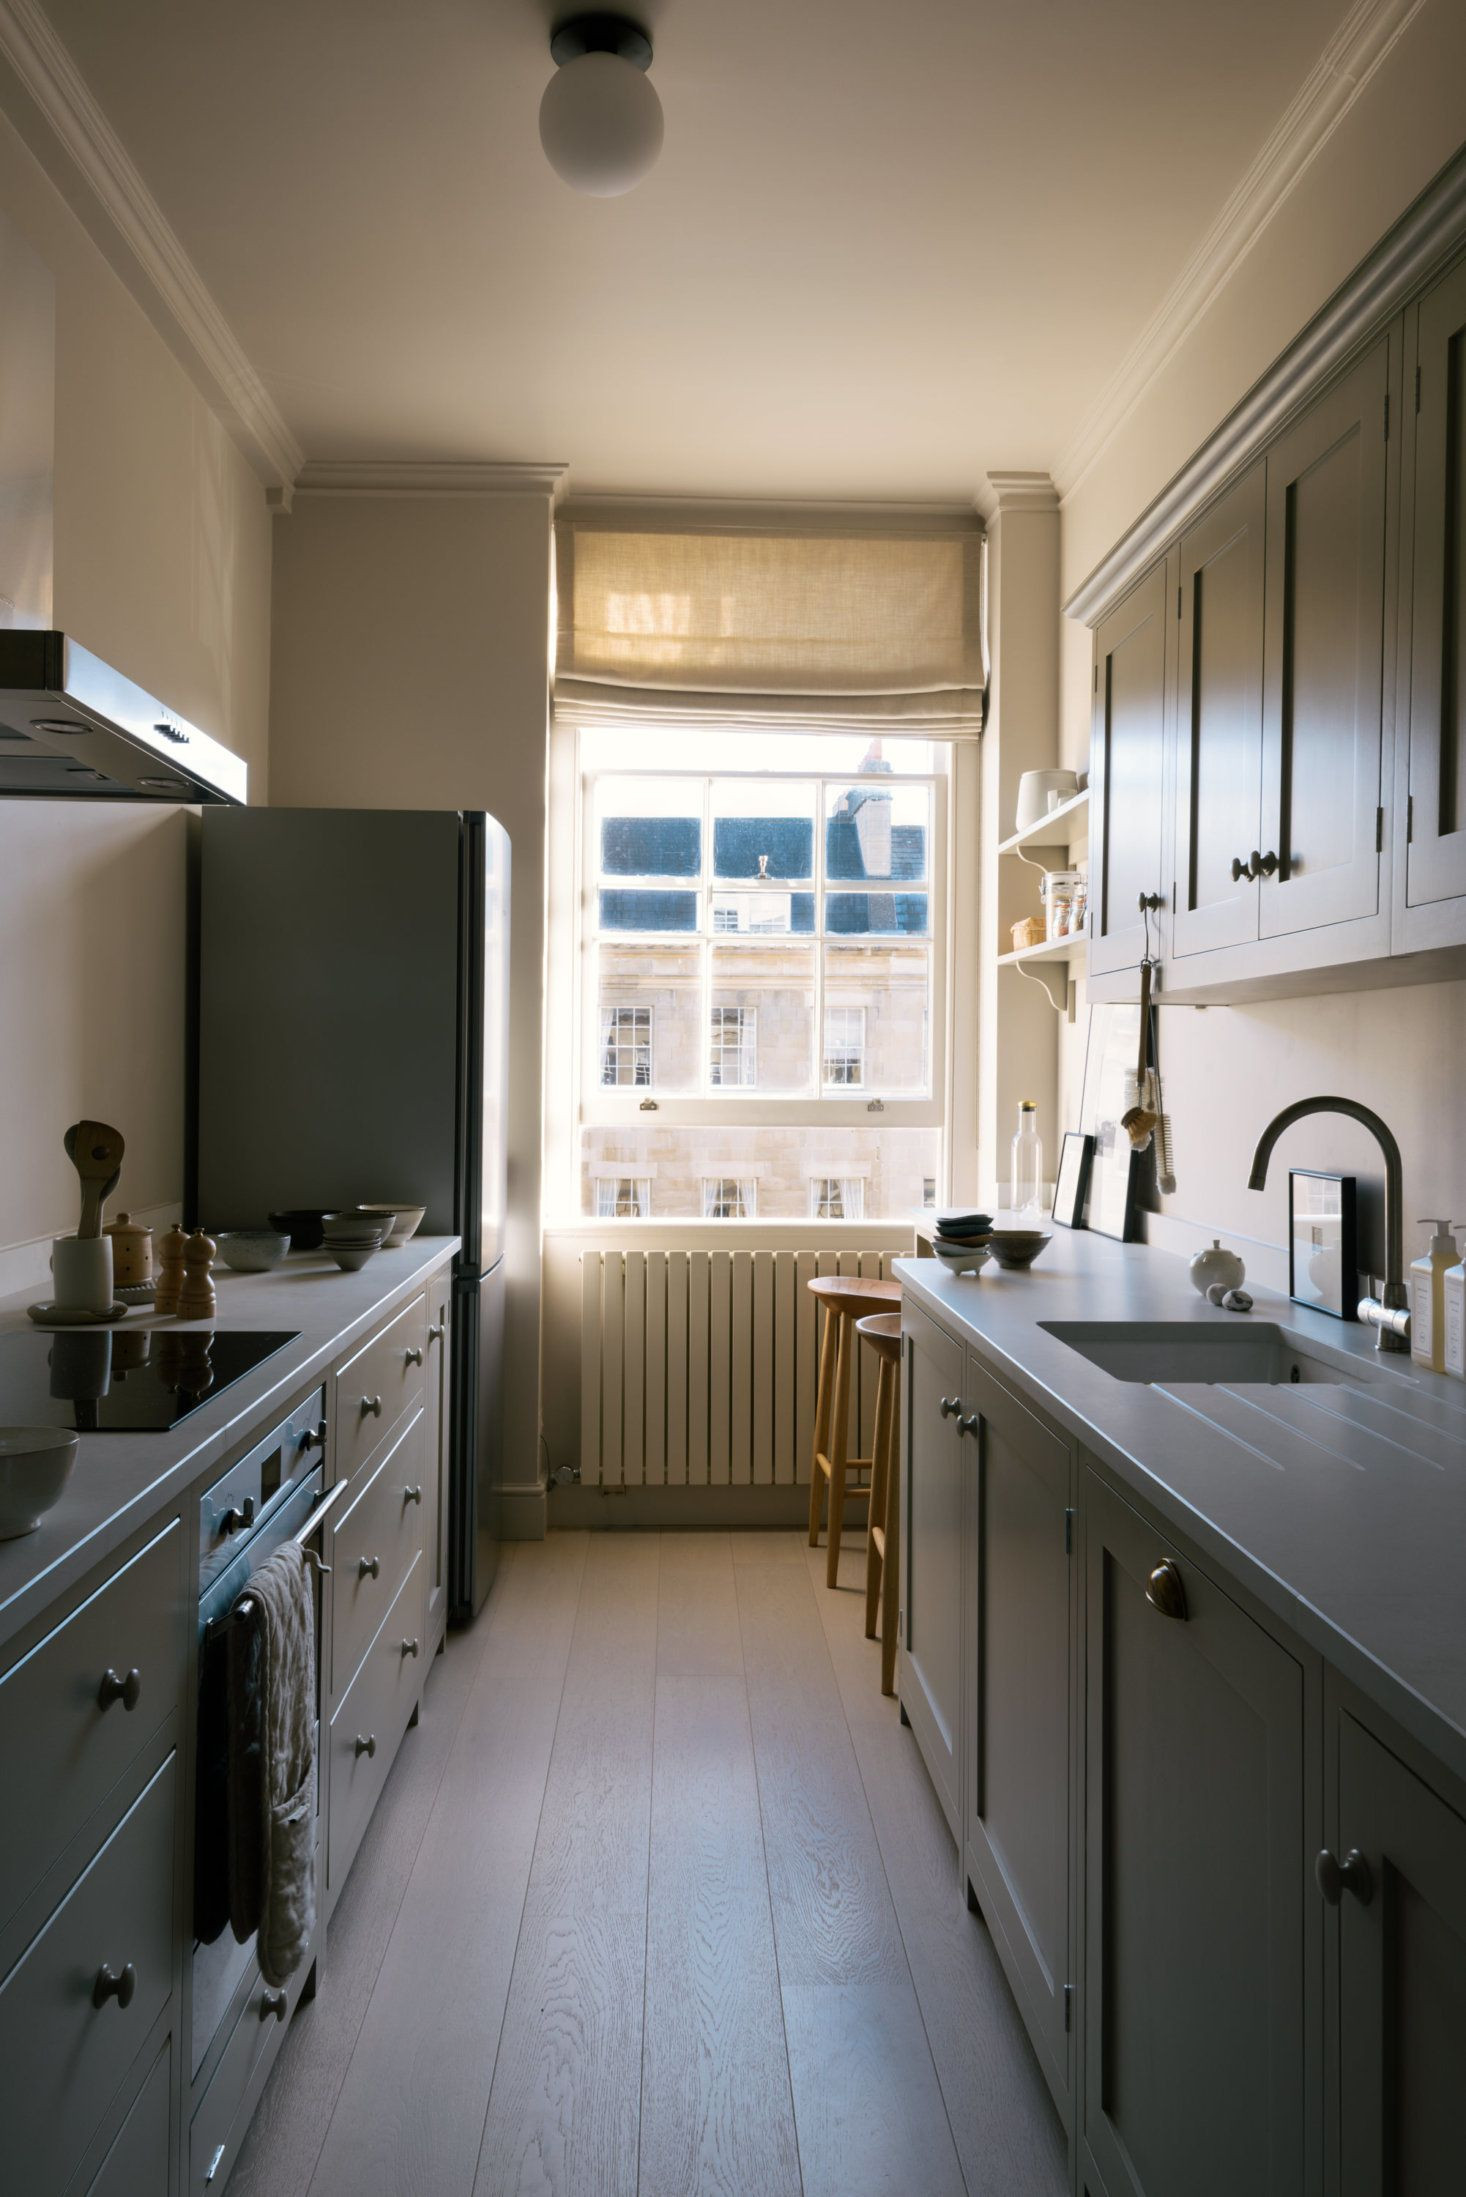 Small Galley Kitchen Remodeling
 Shaker Galley Kitchen a Stylish Small Design by deVol for